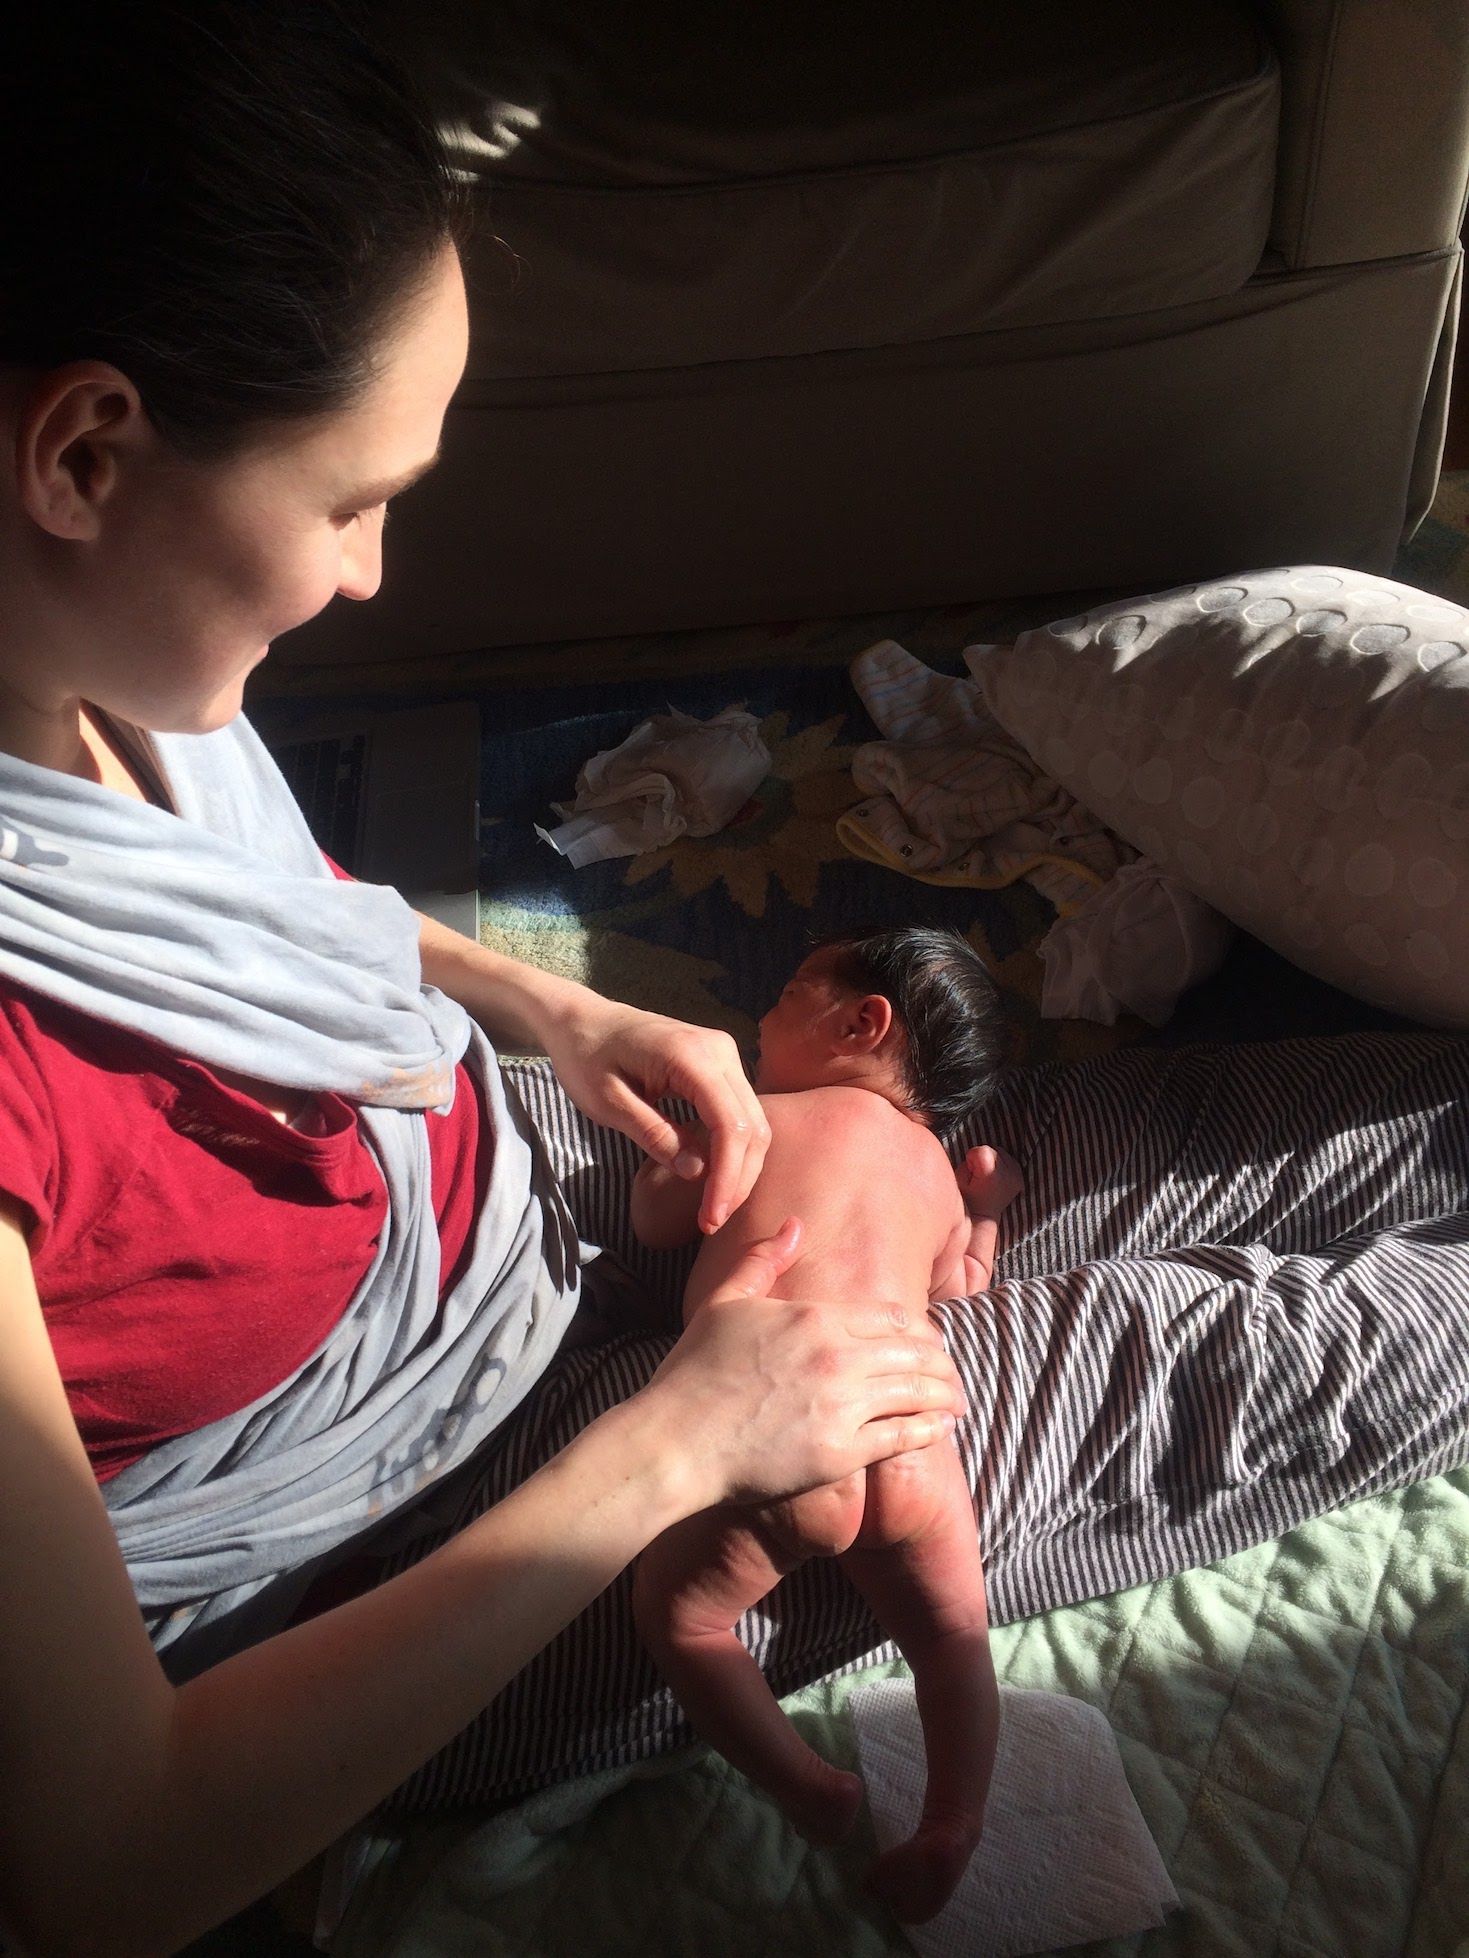 Mom with bare newborn baby laid across her lap